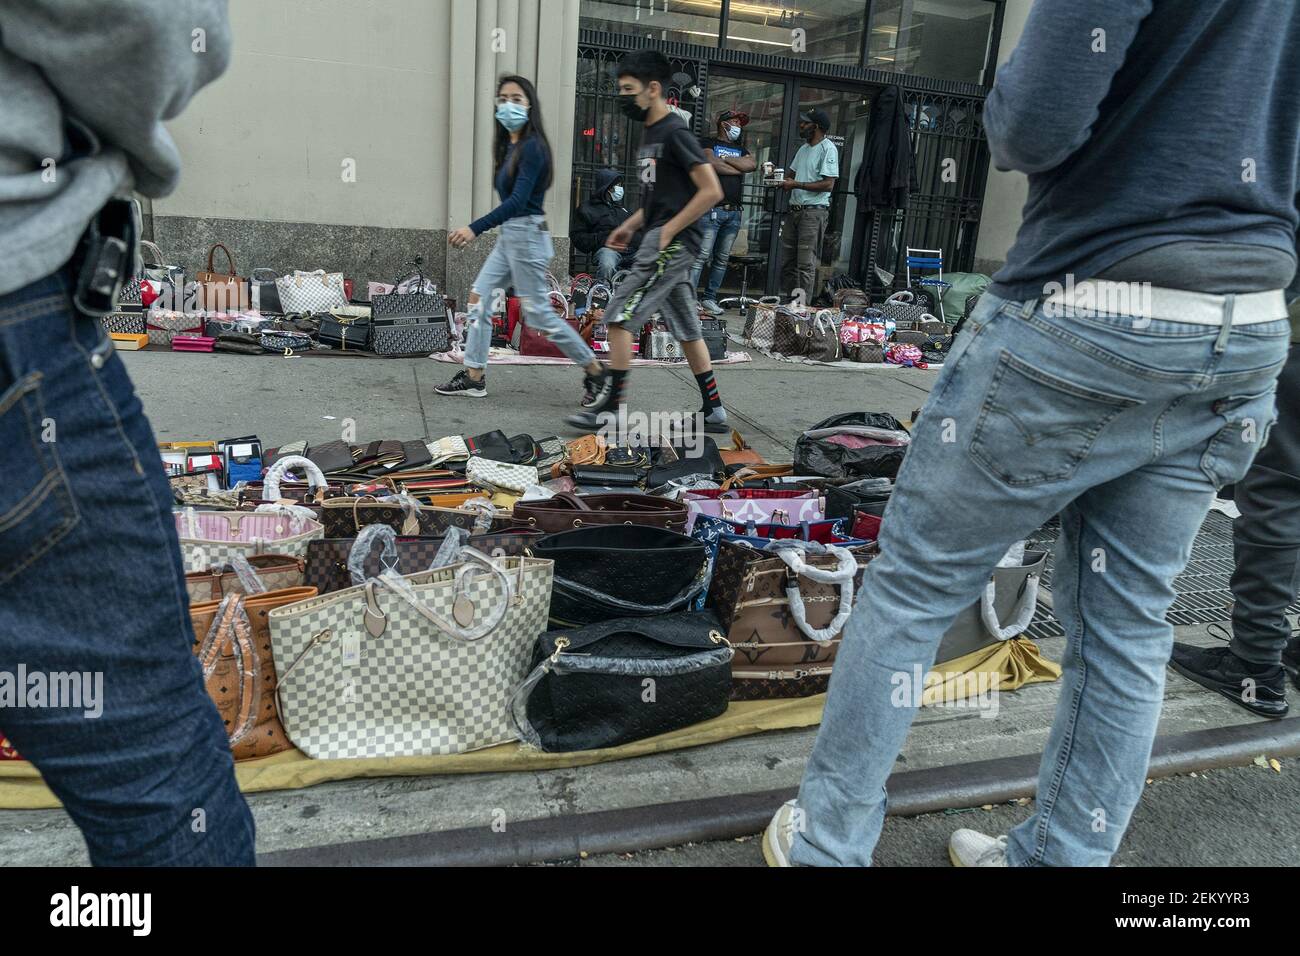 New York, NY - November 9, 2020: Street vendors sell counterfeits goods  like bags, sunglasses, belts and watches on Canal street and Broadway  corners Stock Photo - Alamy